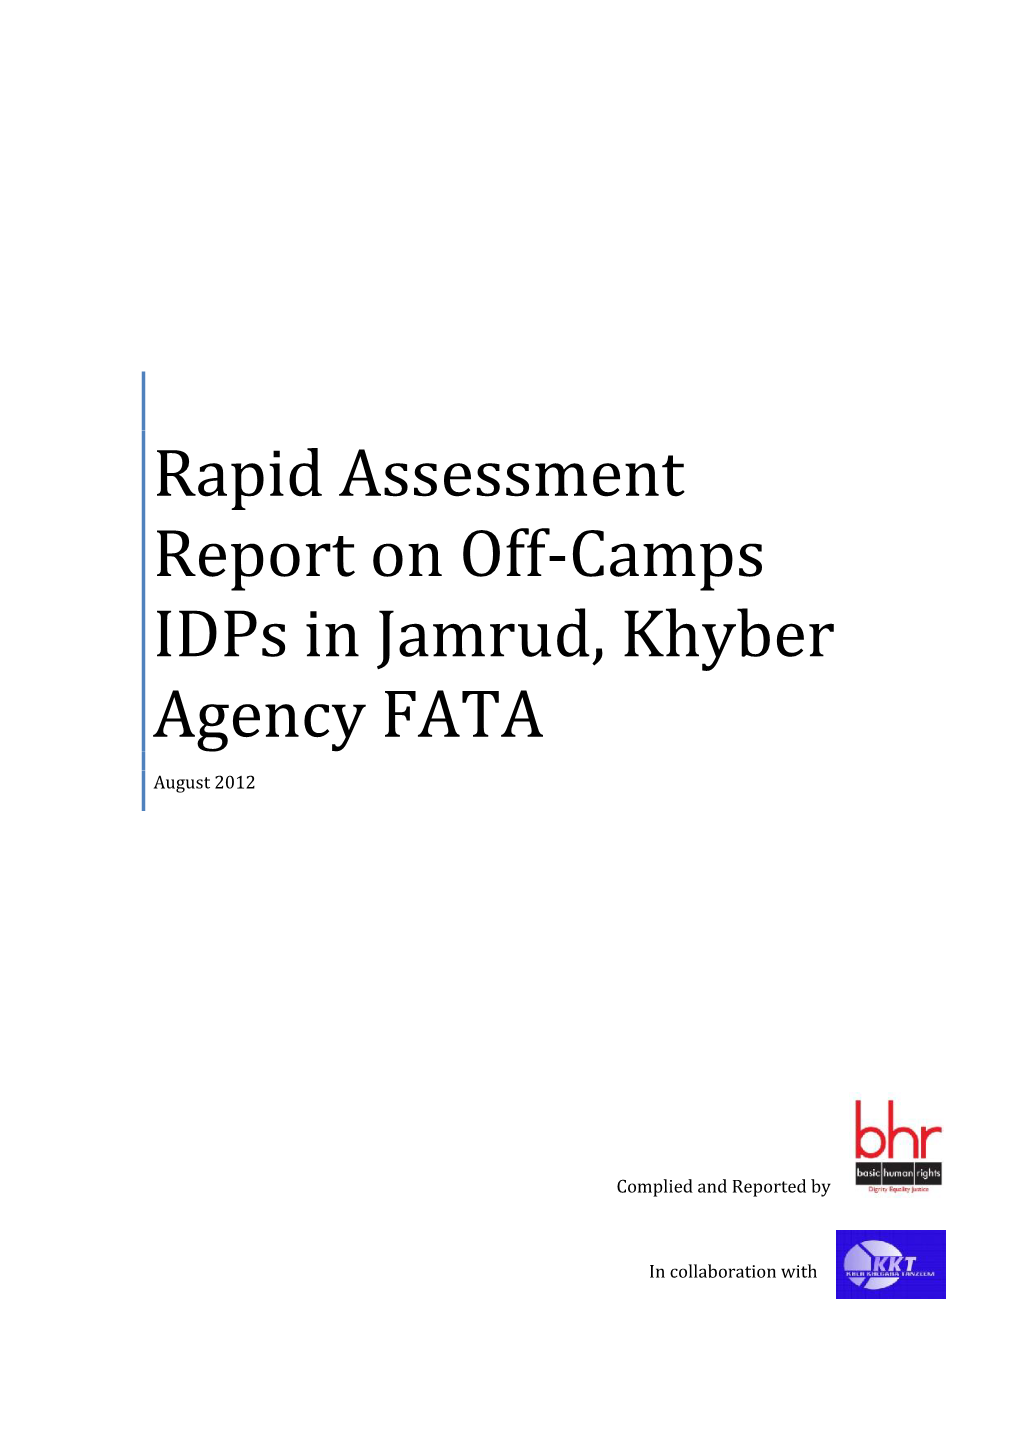 Rapid Assessment Report on Off-Camps Idps in Jamrud, Khyber August 2012 Agency FATA